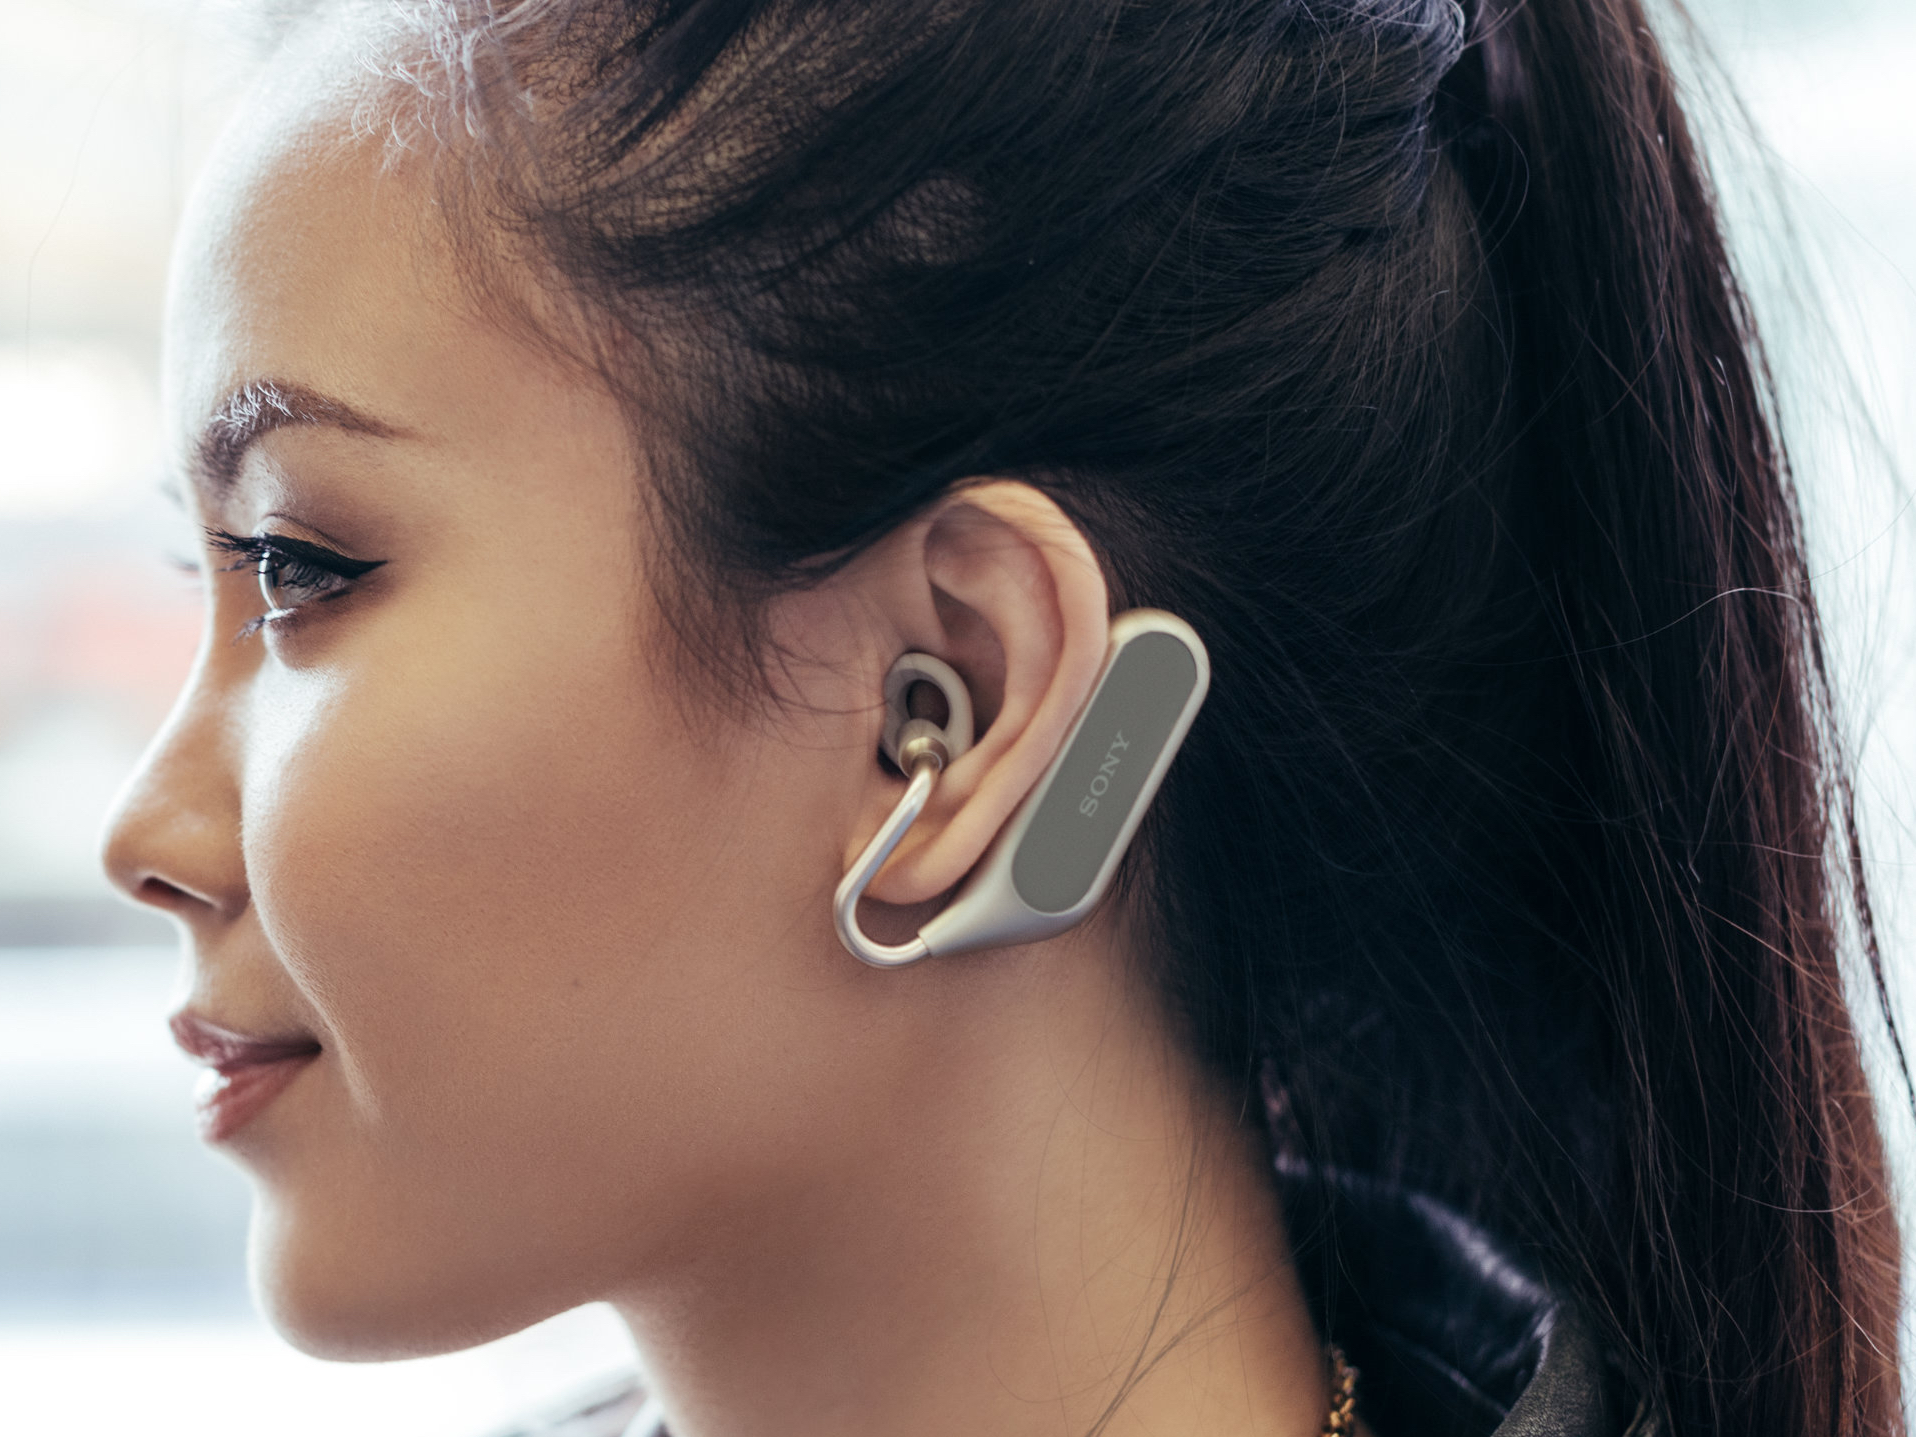 An individual in profile wearing Sony's Xperia Ear Duo wireless earbuds